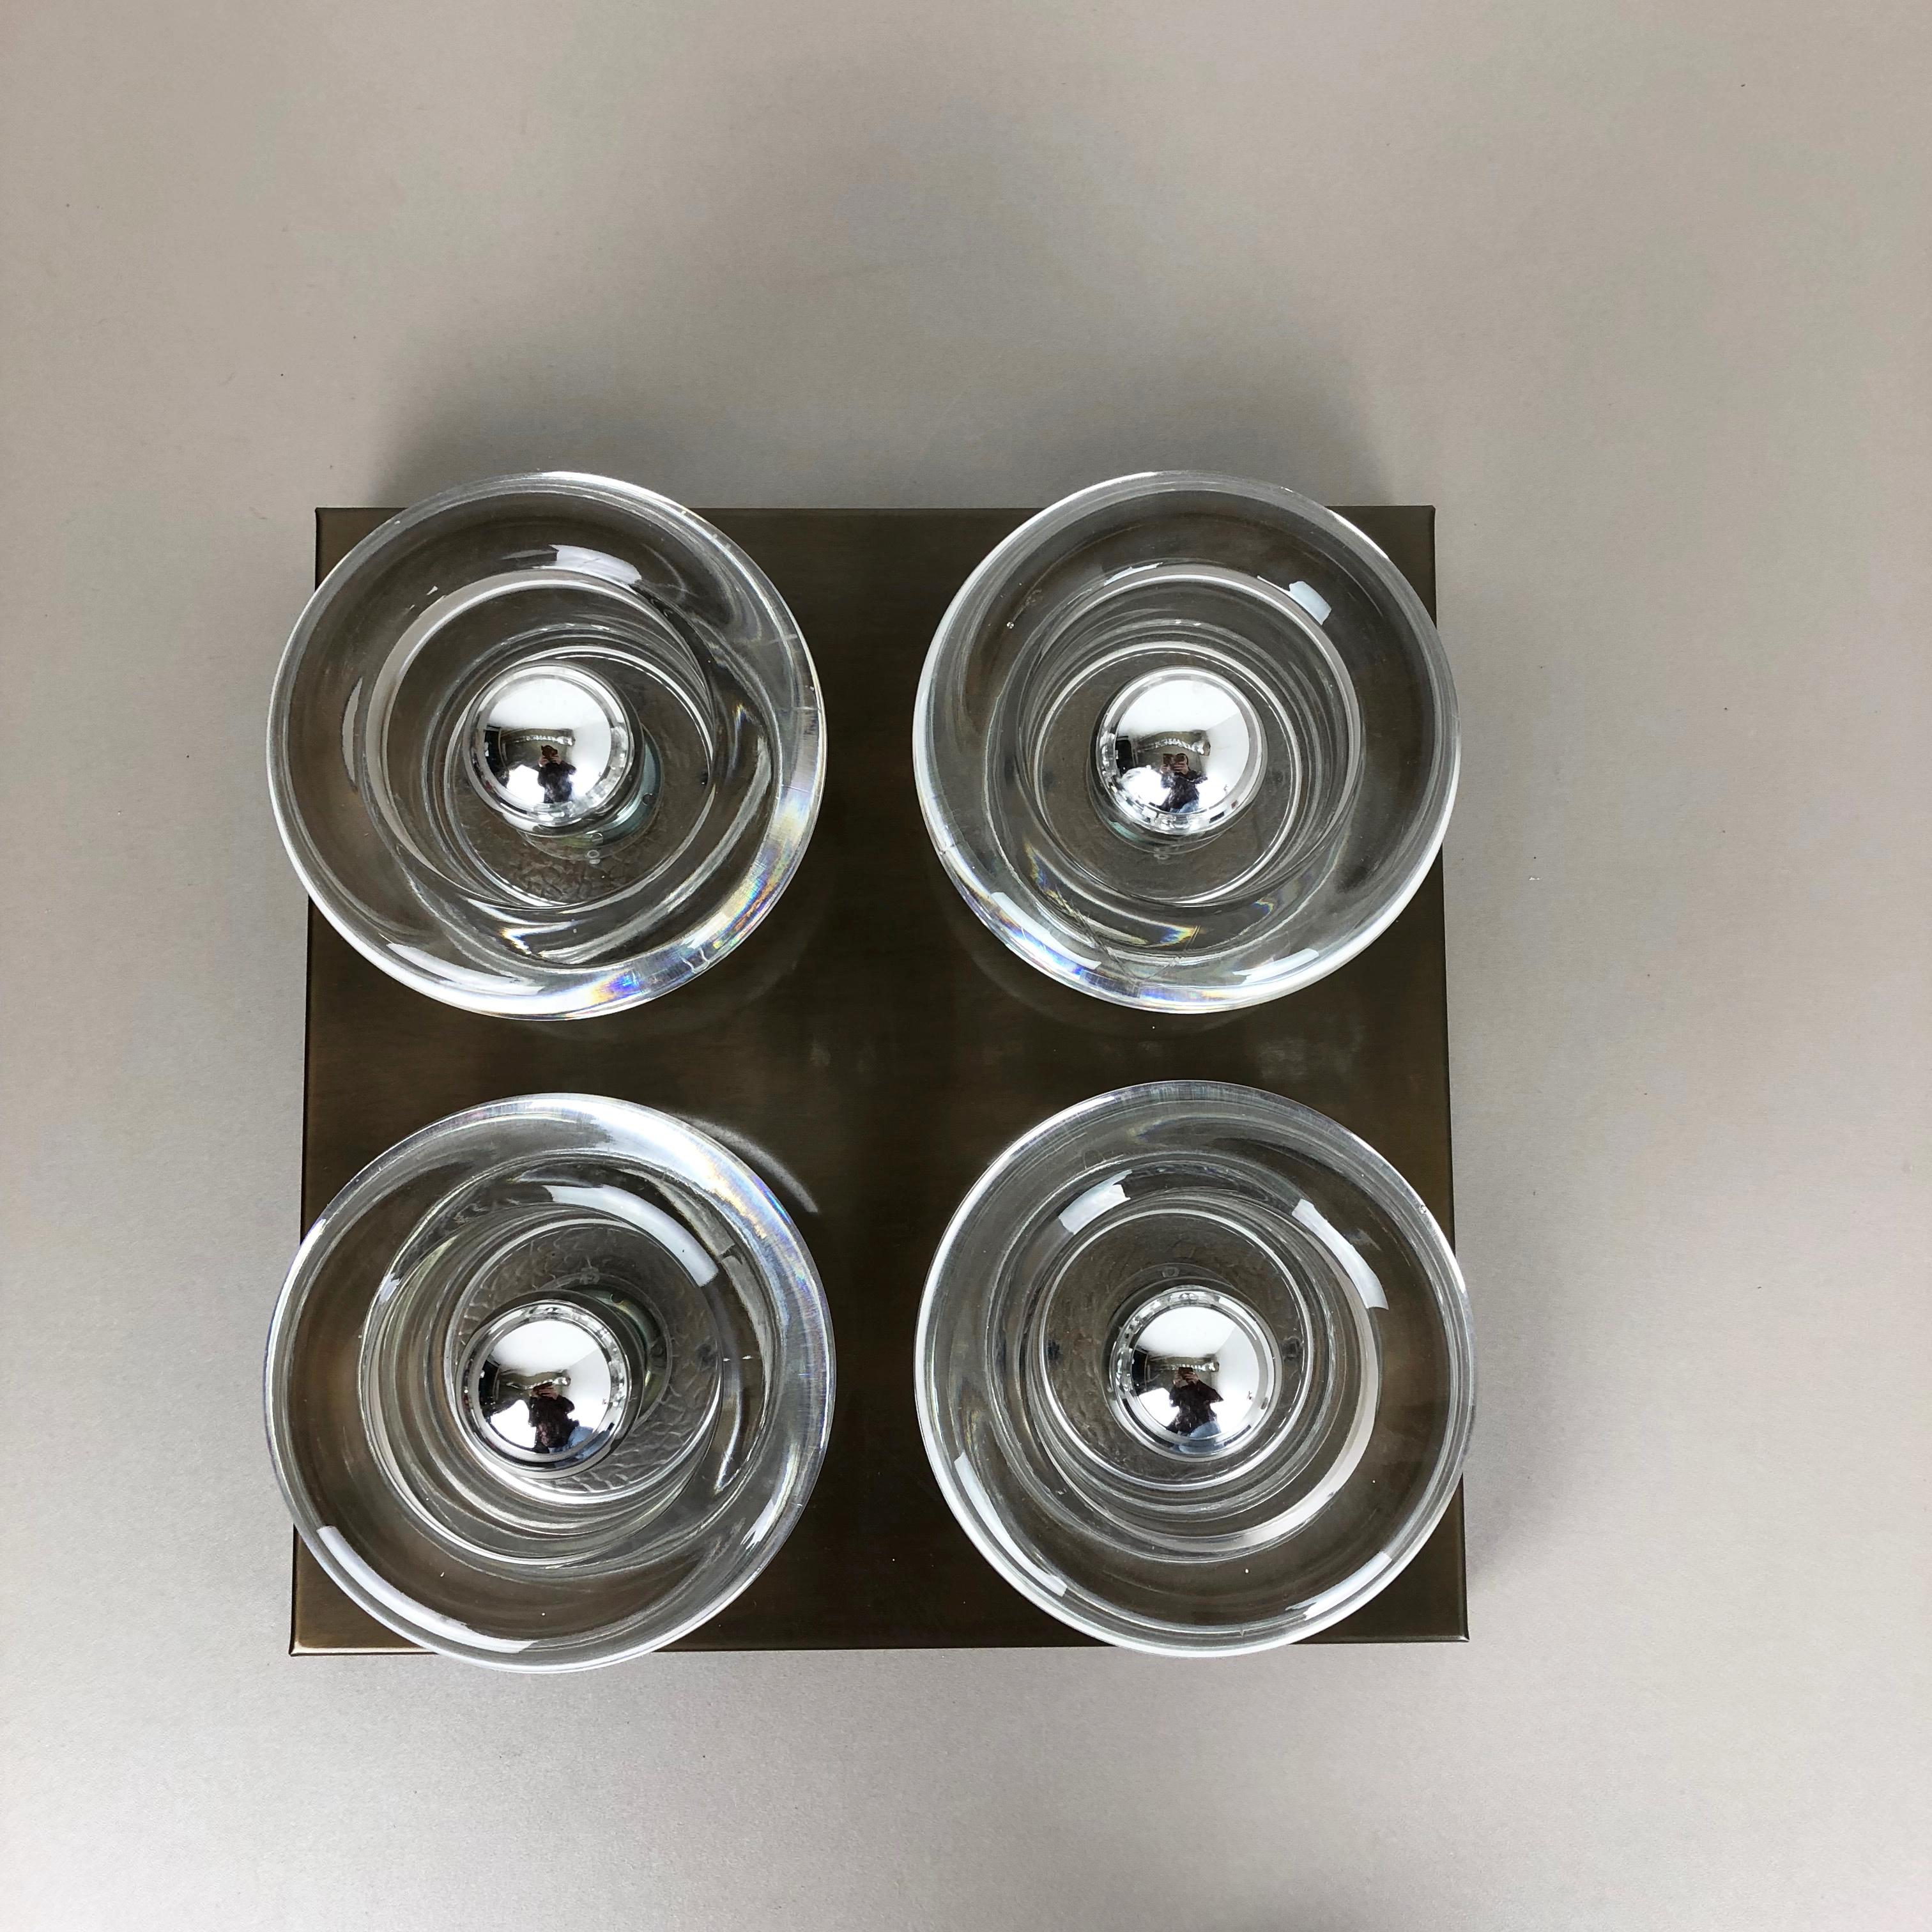 Article:

Wall ceiling light


Producer:

Cosack lights, Germany (see label)


Origin:

Germany


Age:

1970s


Original 1970s modernist wall light with four glass lighting elements. this light was designed and produced by Cosack